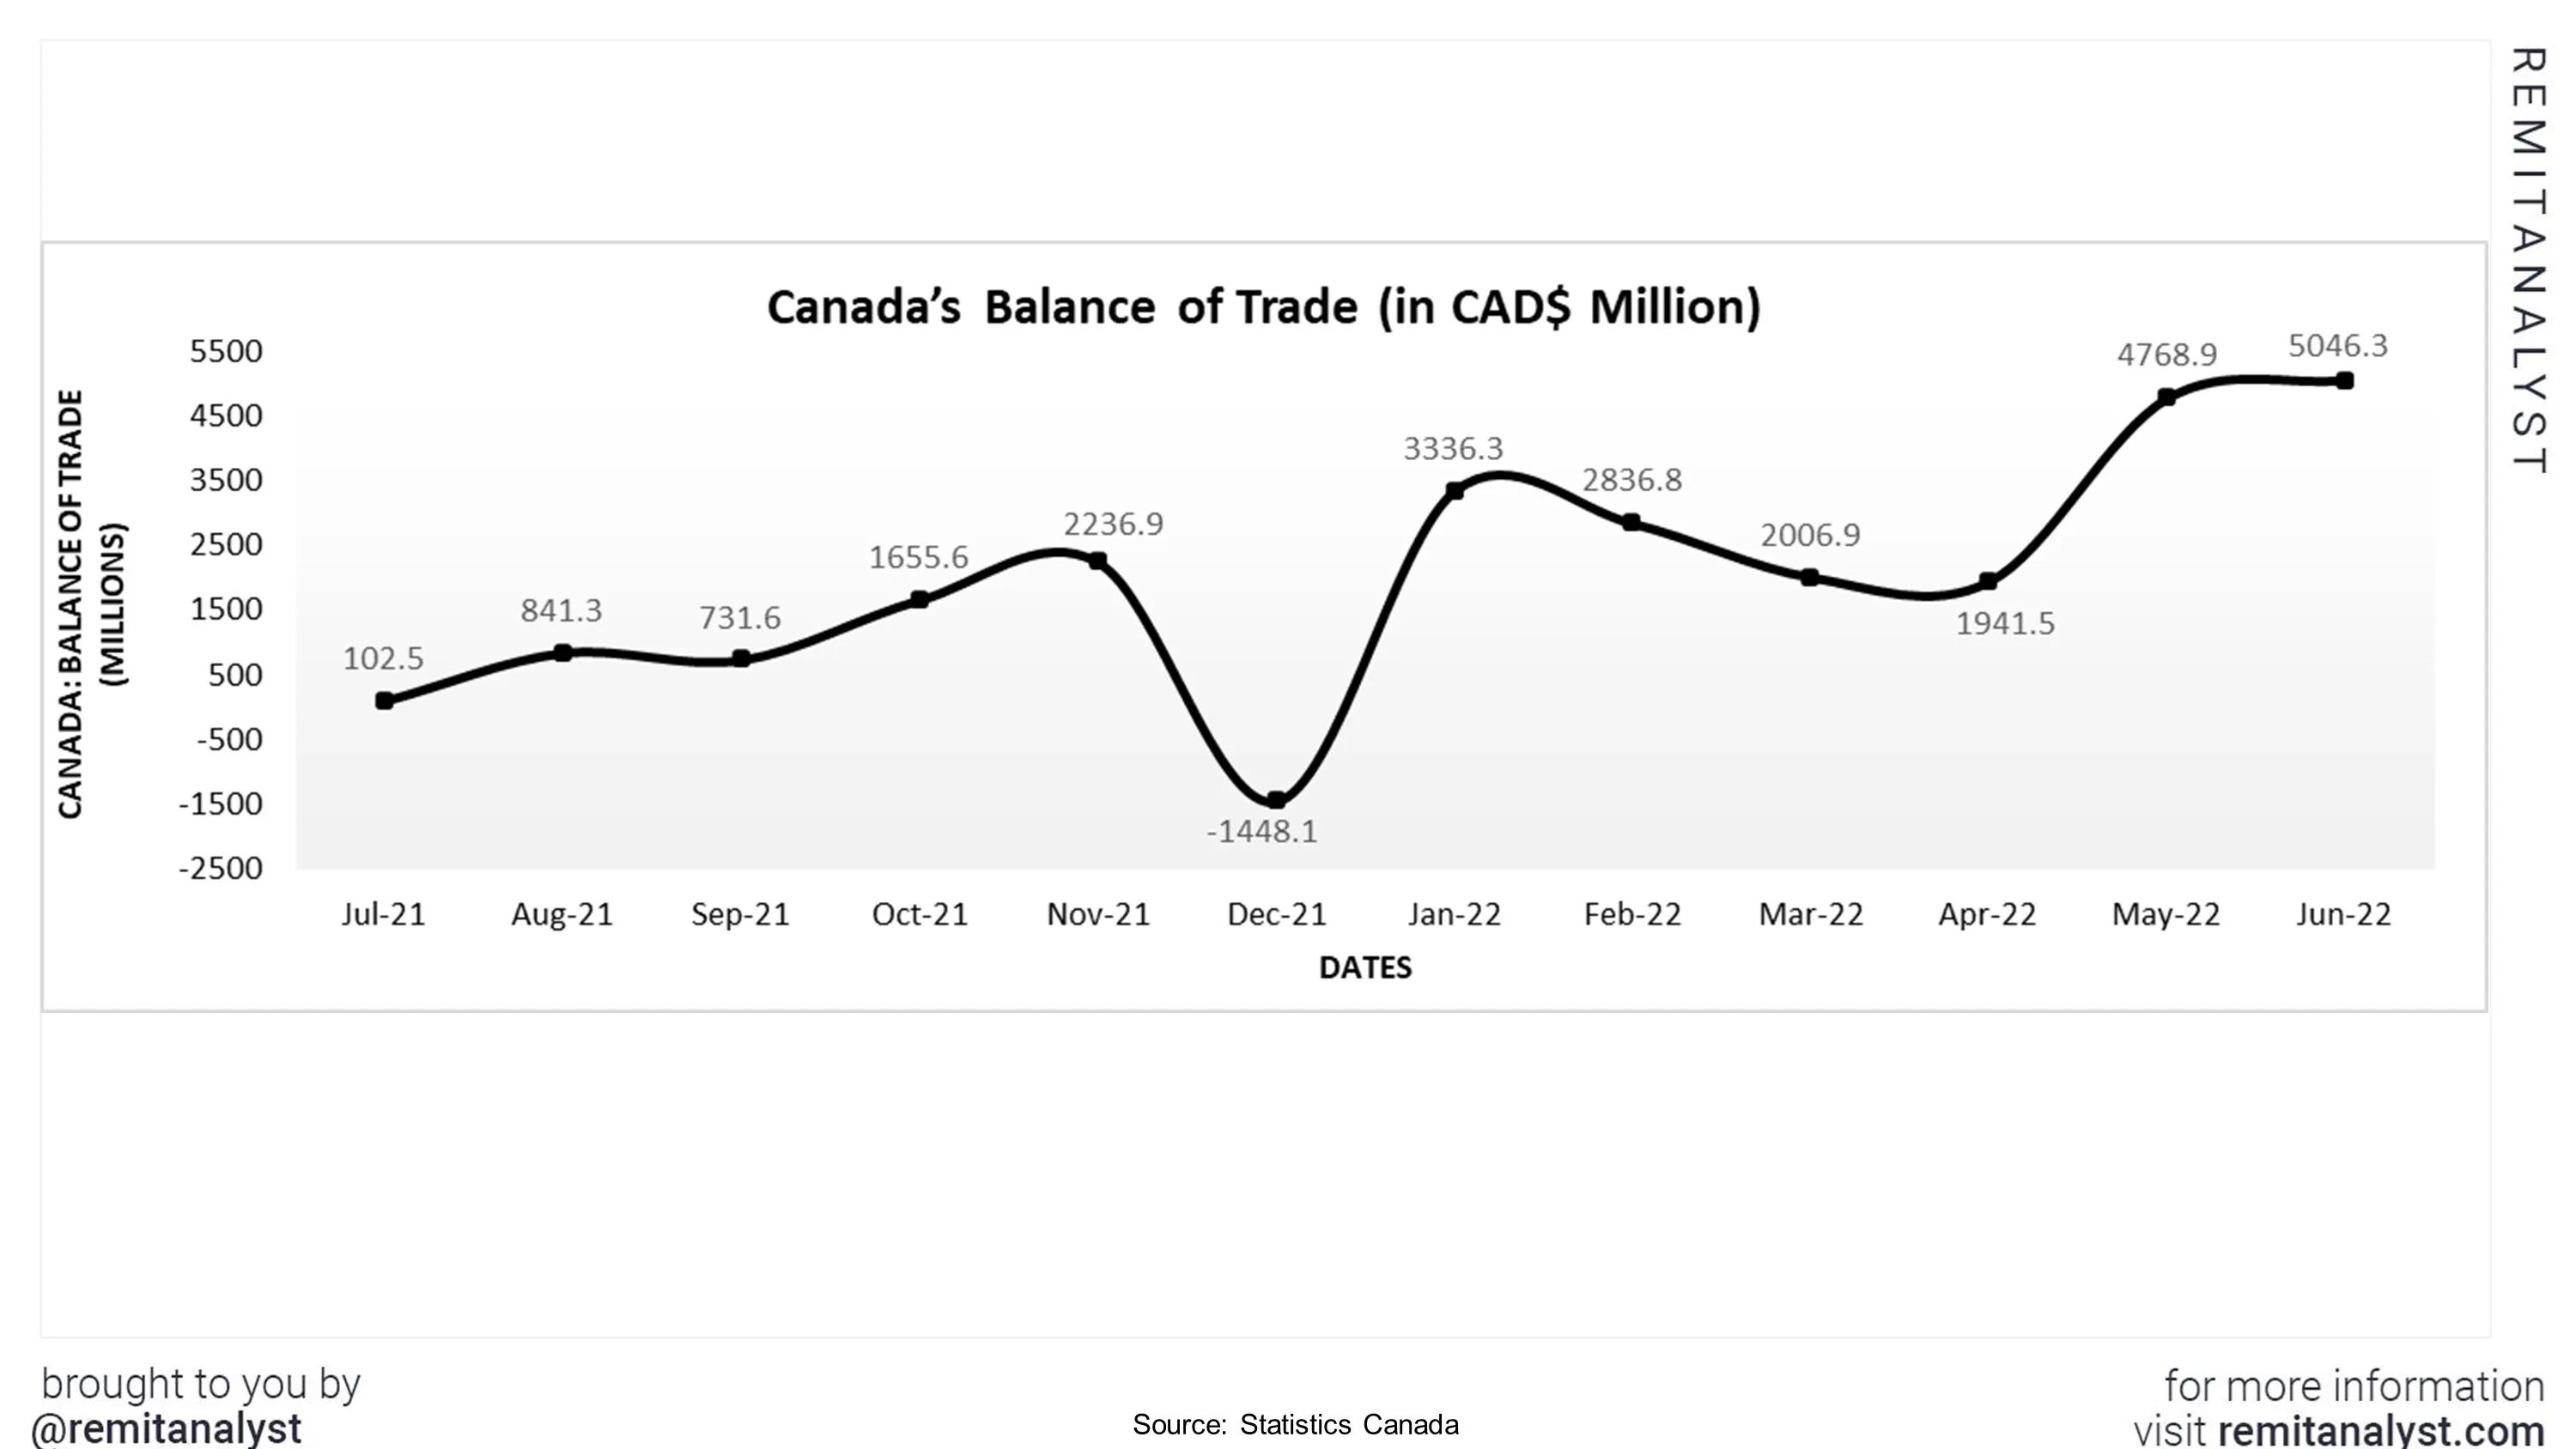 balance-of-trade-canada-july-2021-to-june-2022